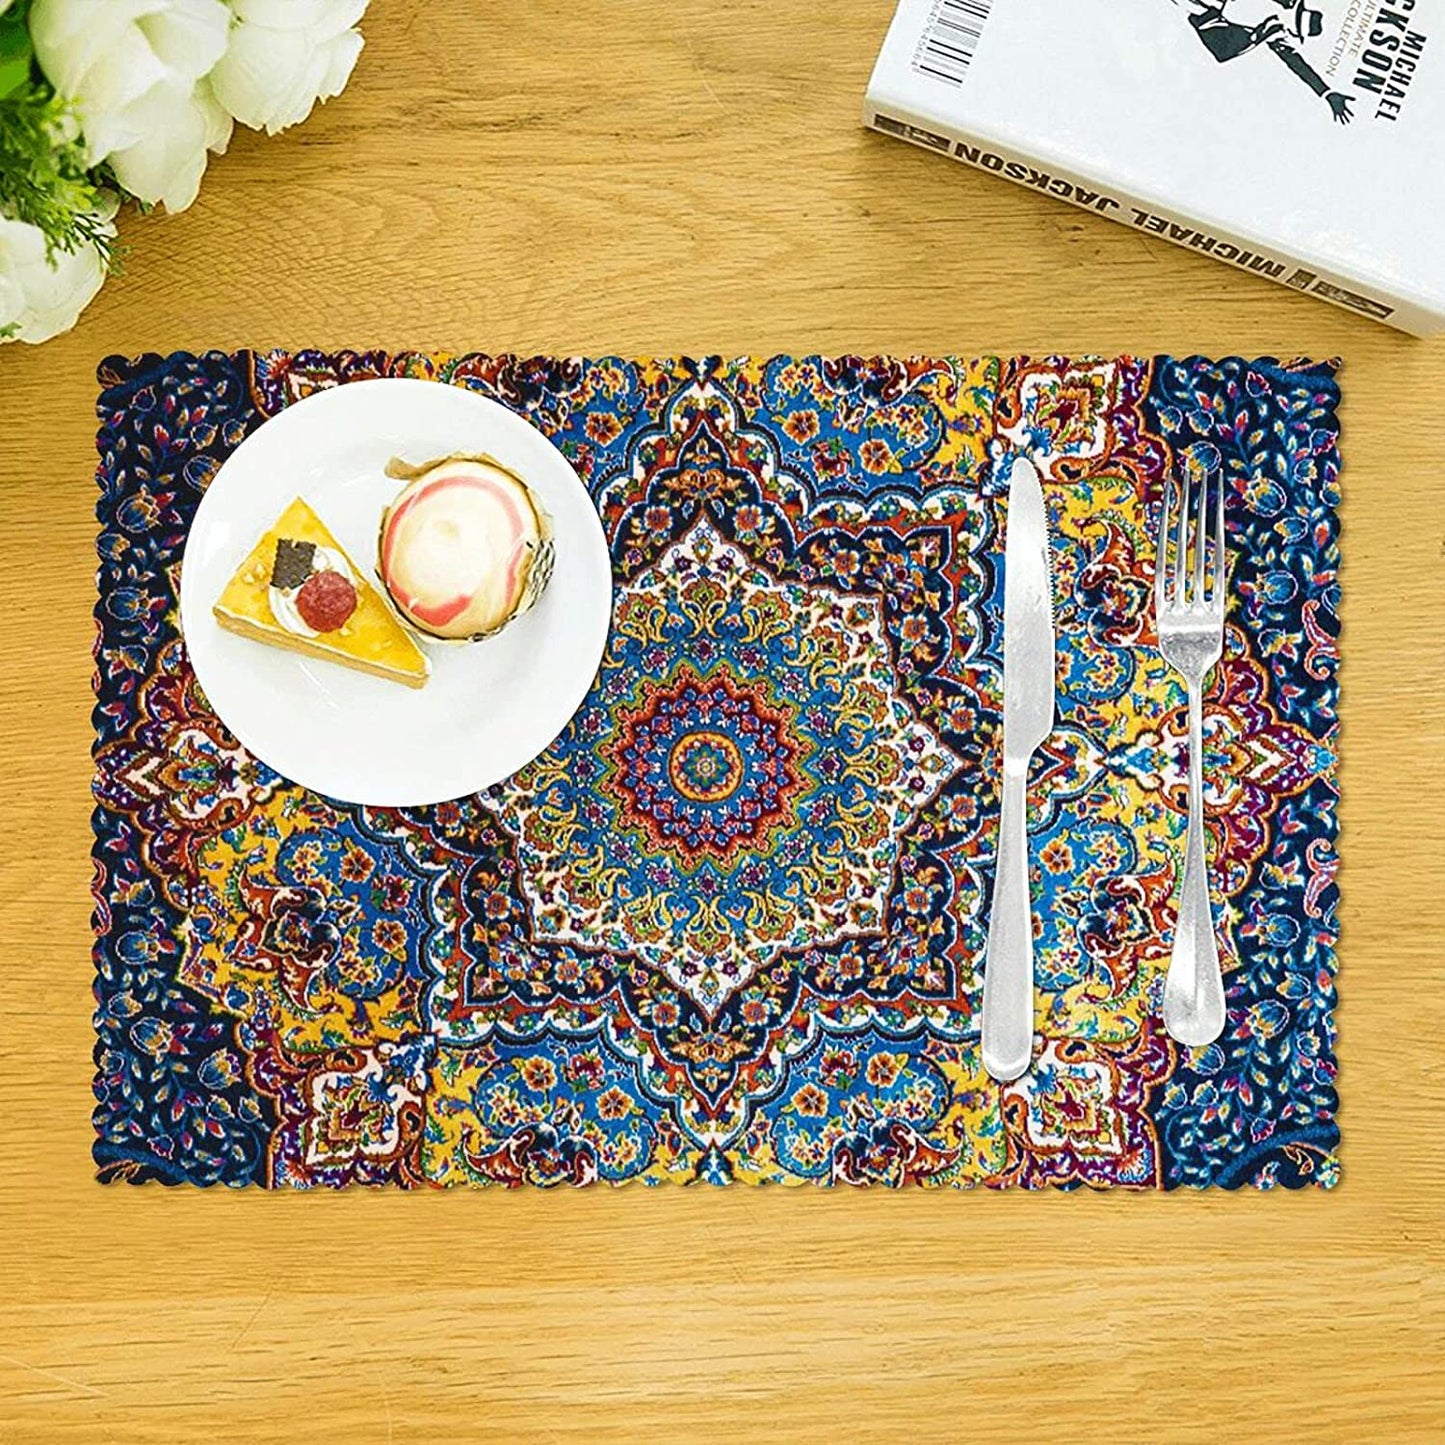 Barneova Colorful Mandala Bohemian Placemats Vintage Farmhouse Floral Plate Mat Washable Heat Resistant Boho Cloth Place Mats Indian Ethnic Ramadan Dinner Placemat Indoor for Kitchen Dining Table Set of 4